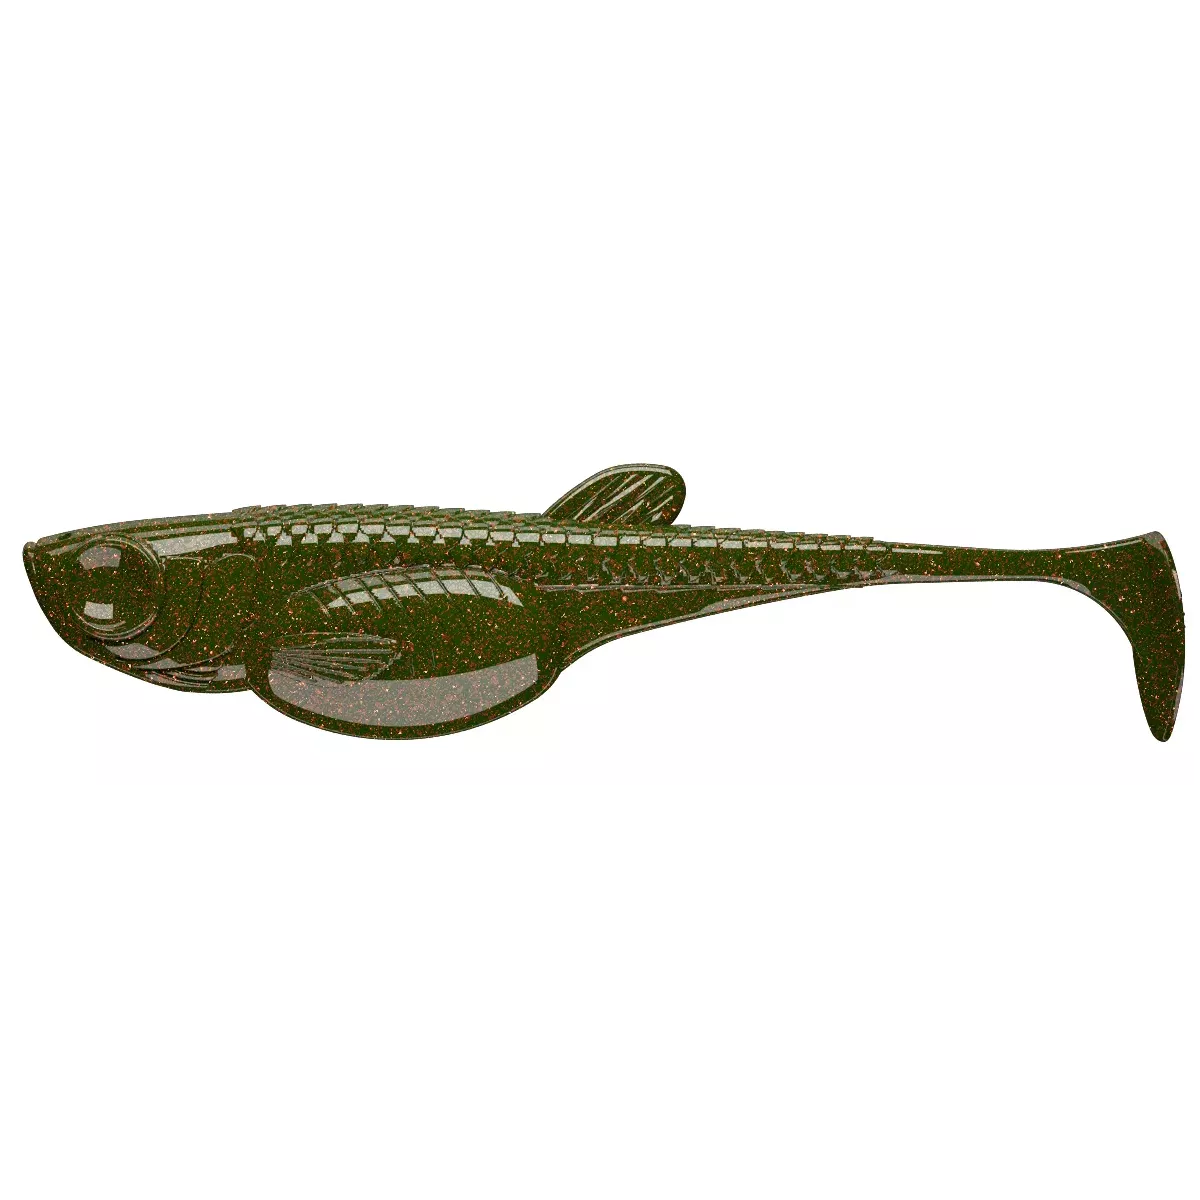 Libra Lures Embrion Shad 3'' 7.5cm - 032 / MOTOR OIL GREEN